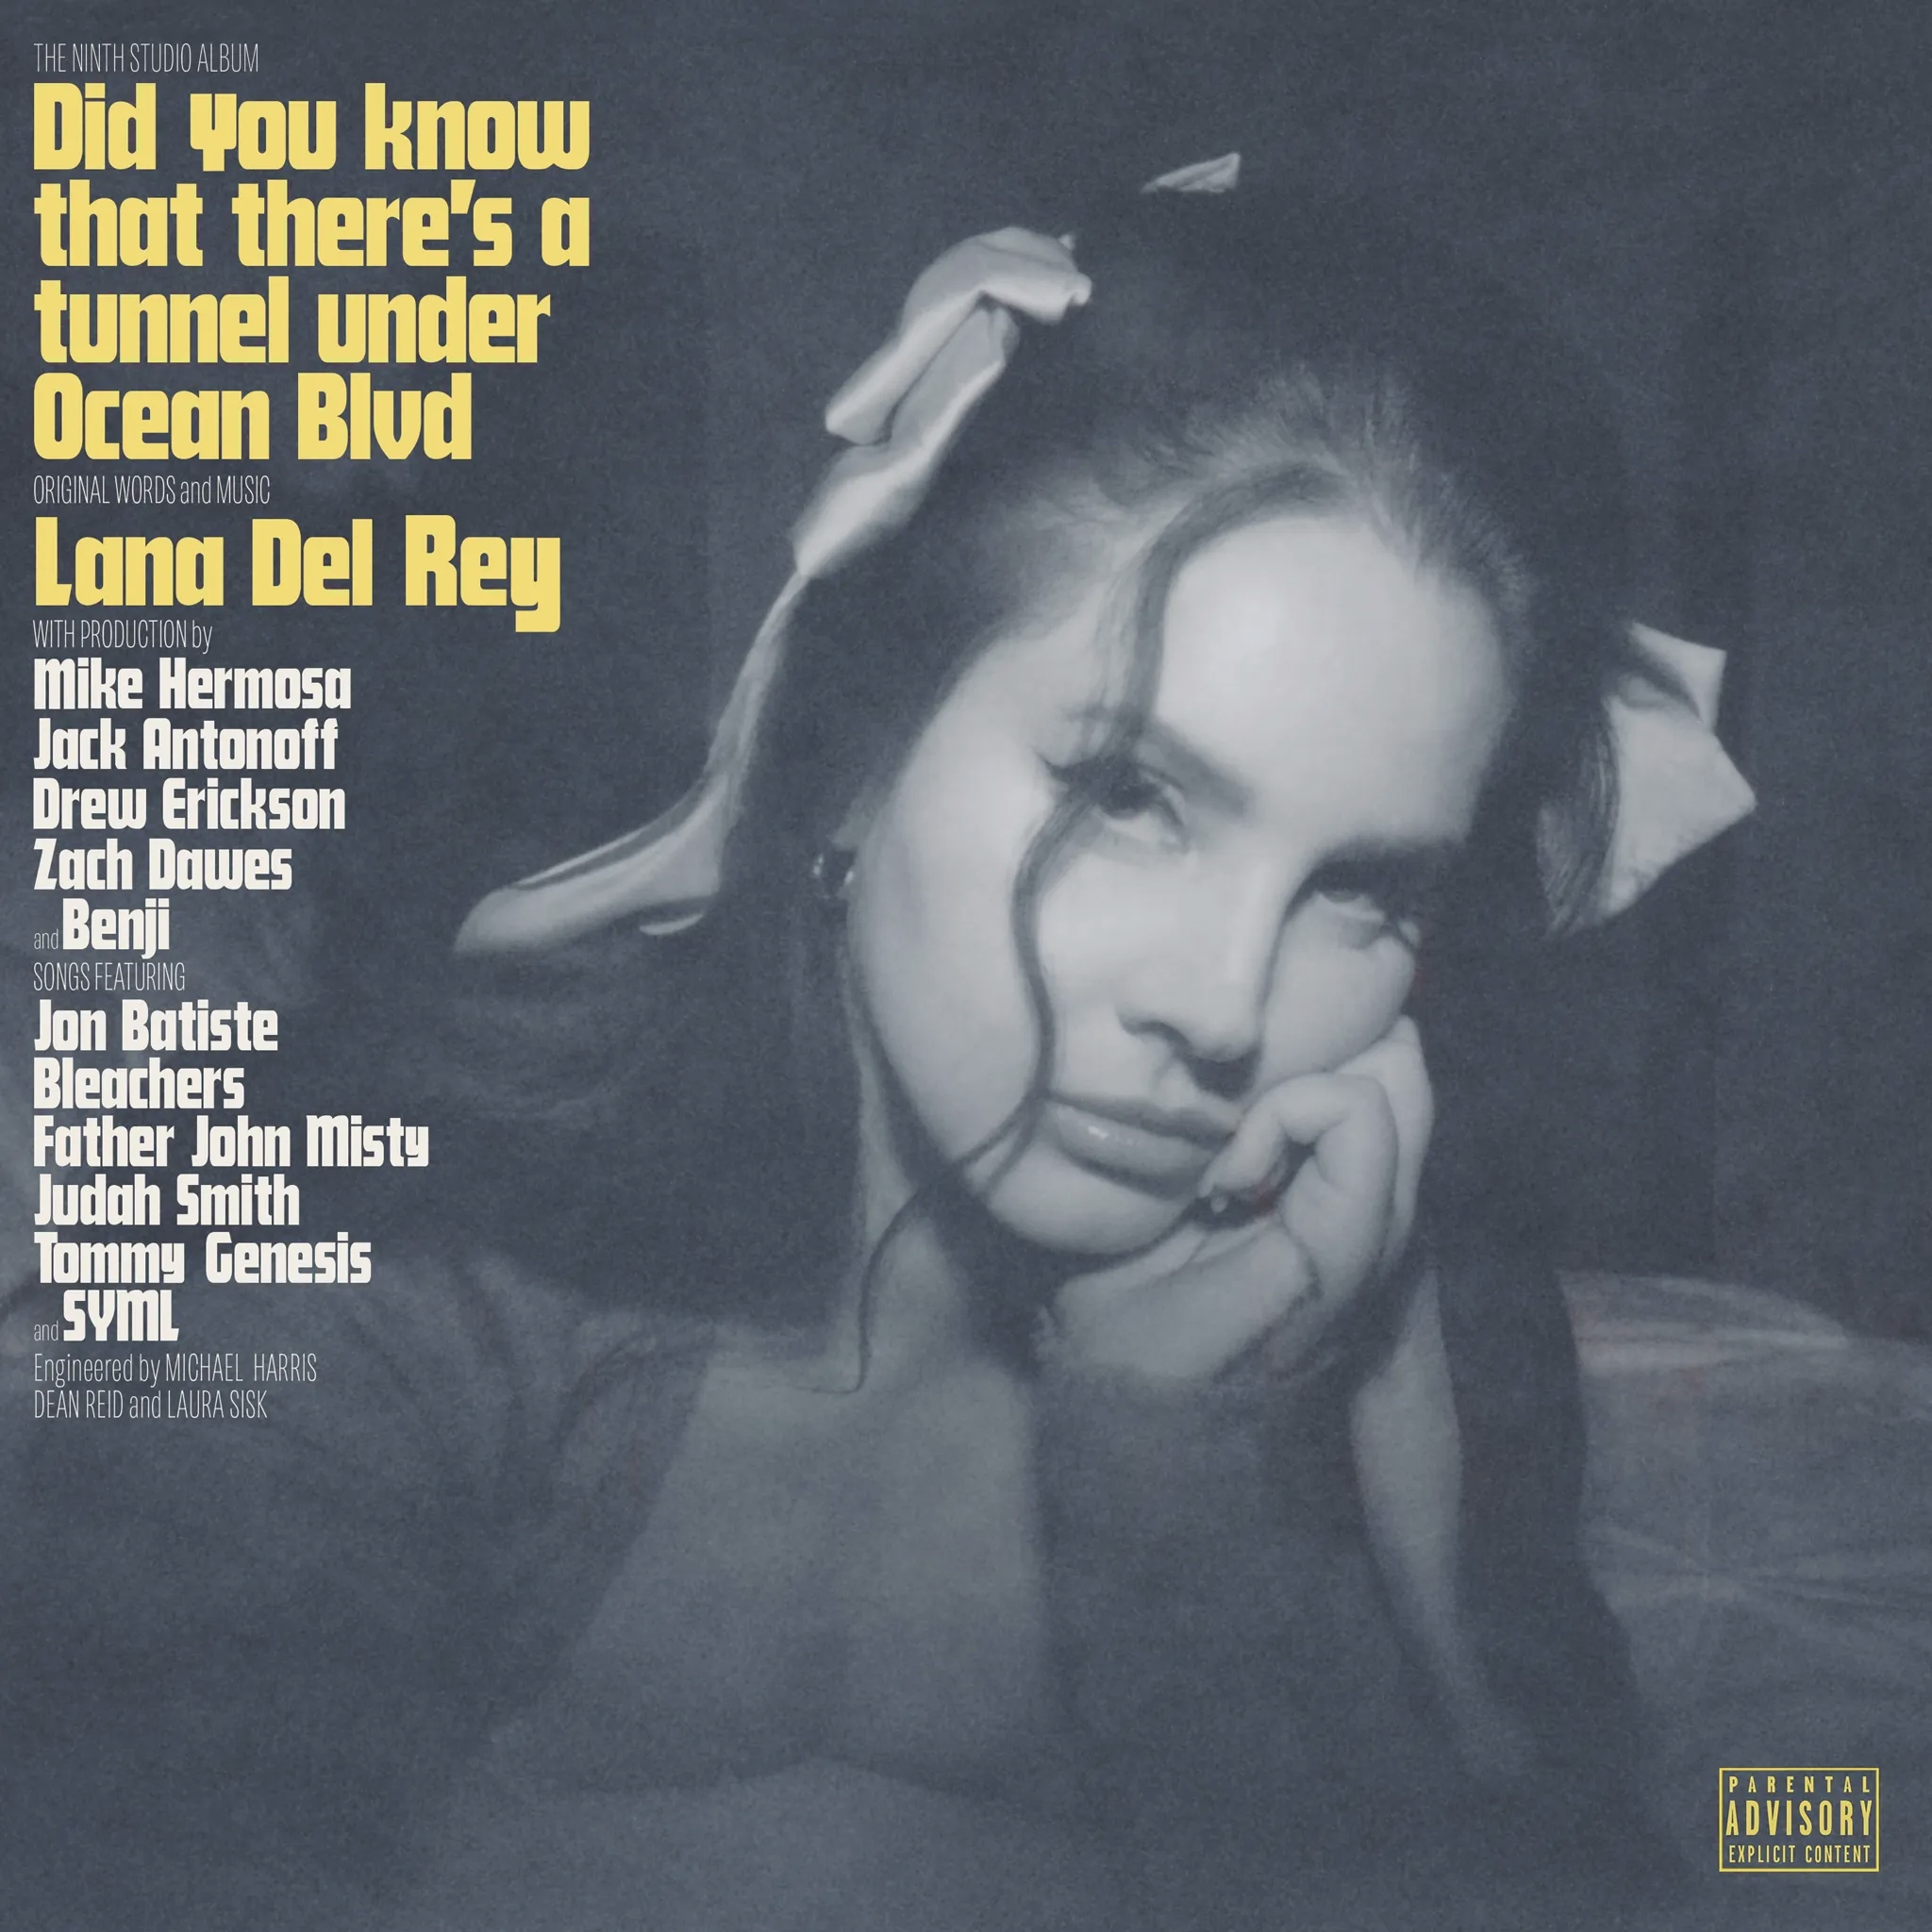 Album artwork for Did you know that there's a tunnel under Ocean Blvd  by Lana Del Rey